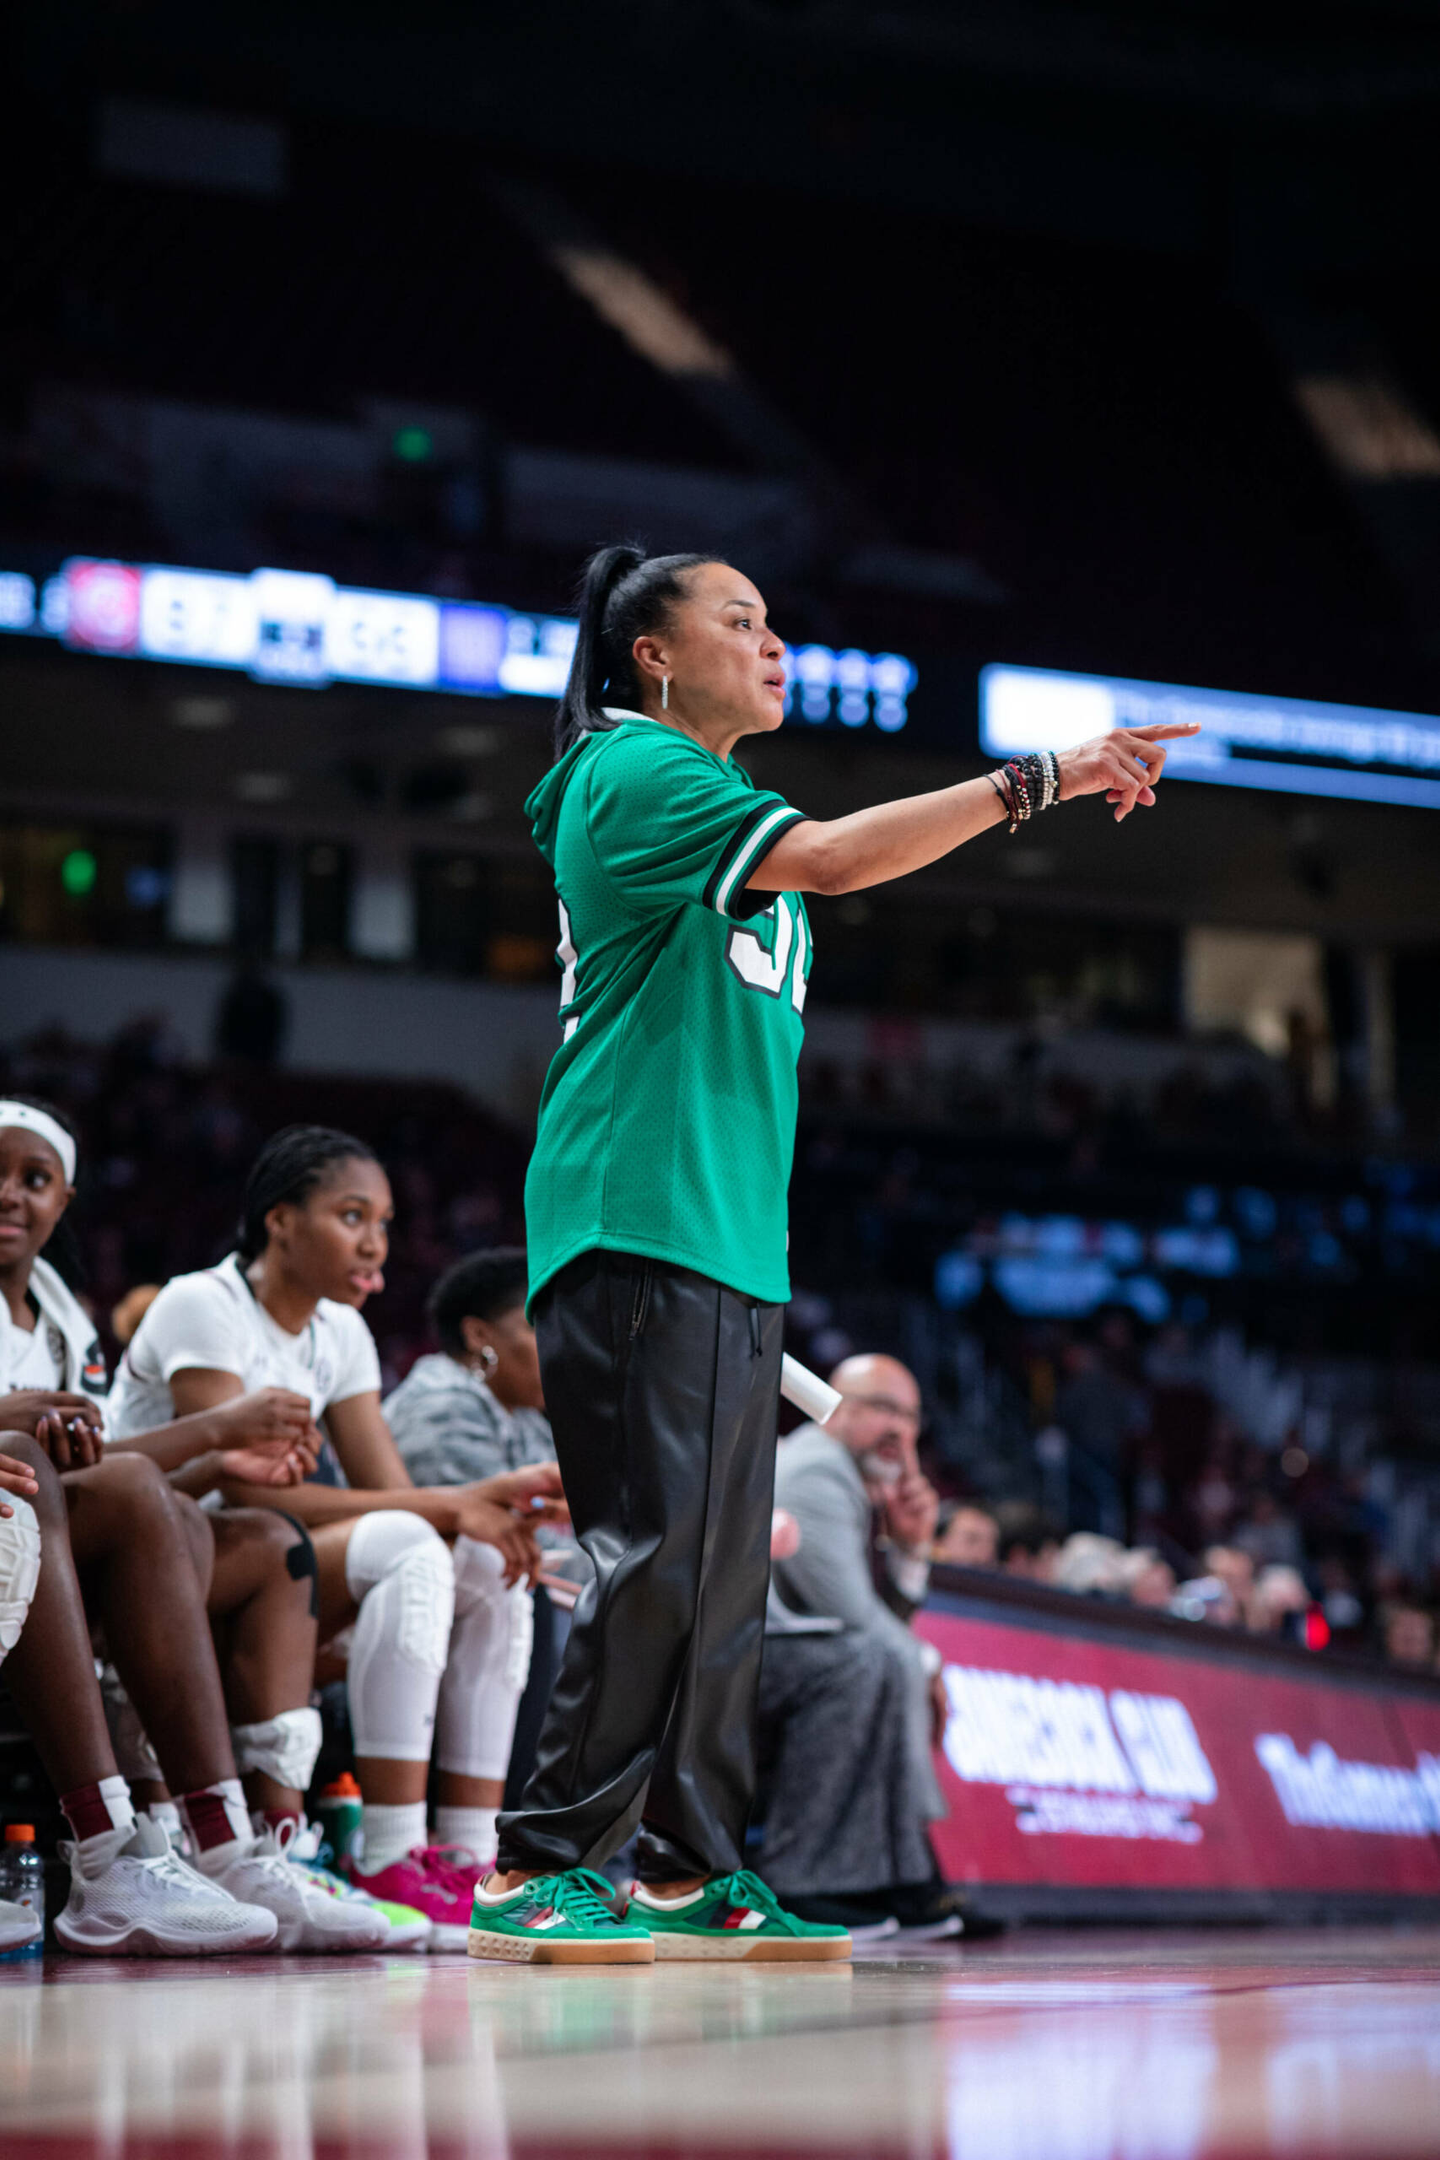 Staley Named Naismith Coach of the Year Finalist